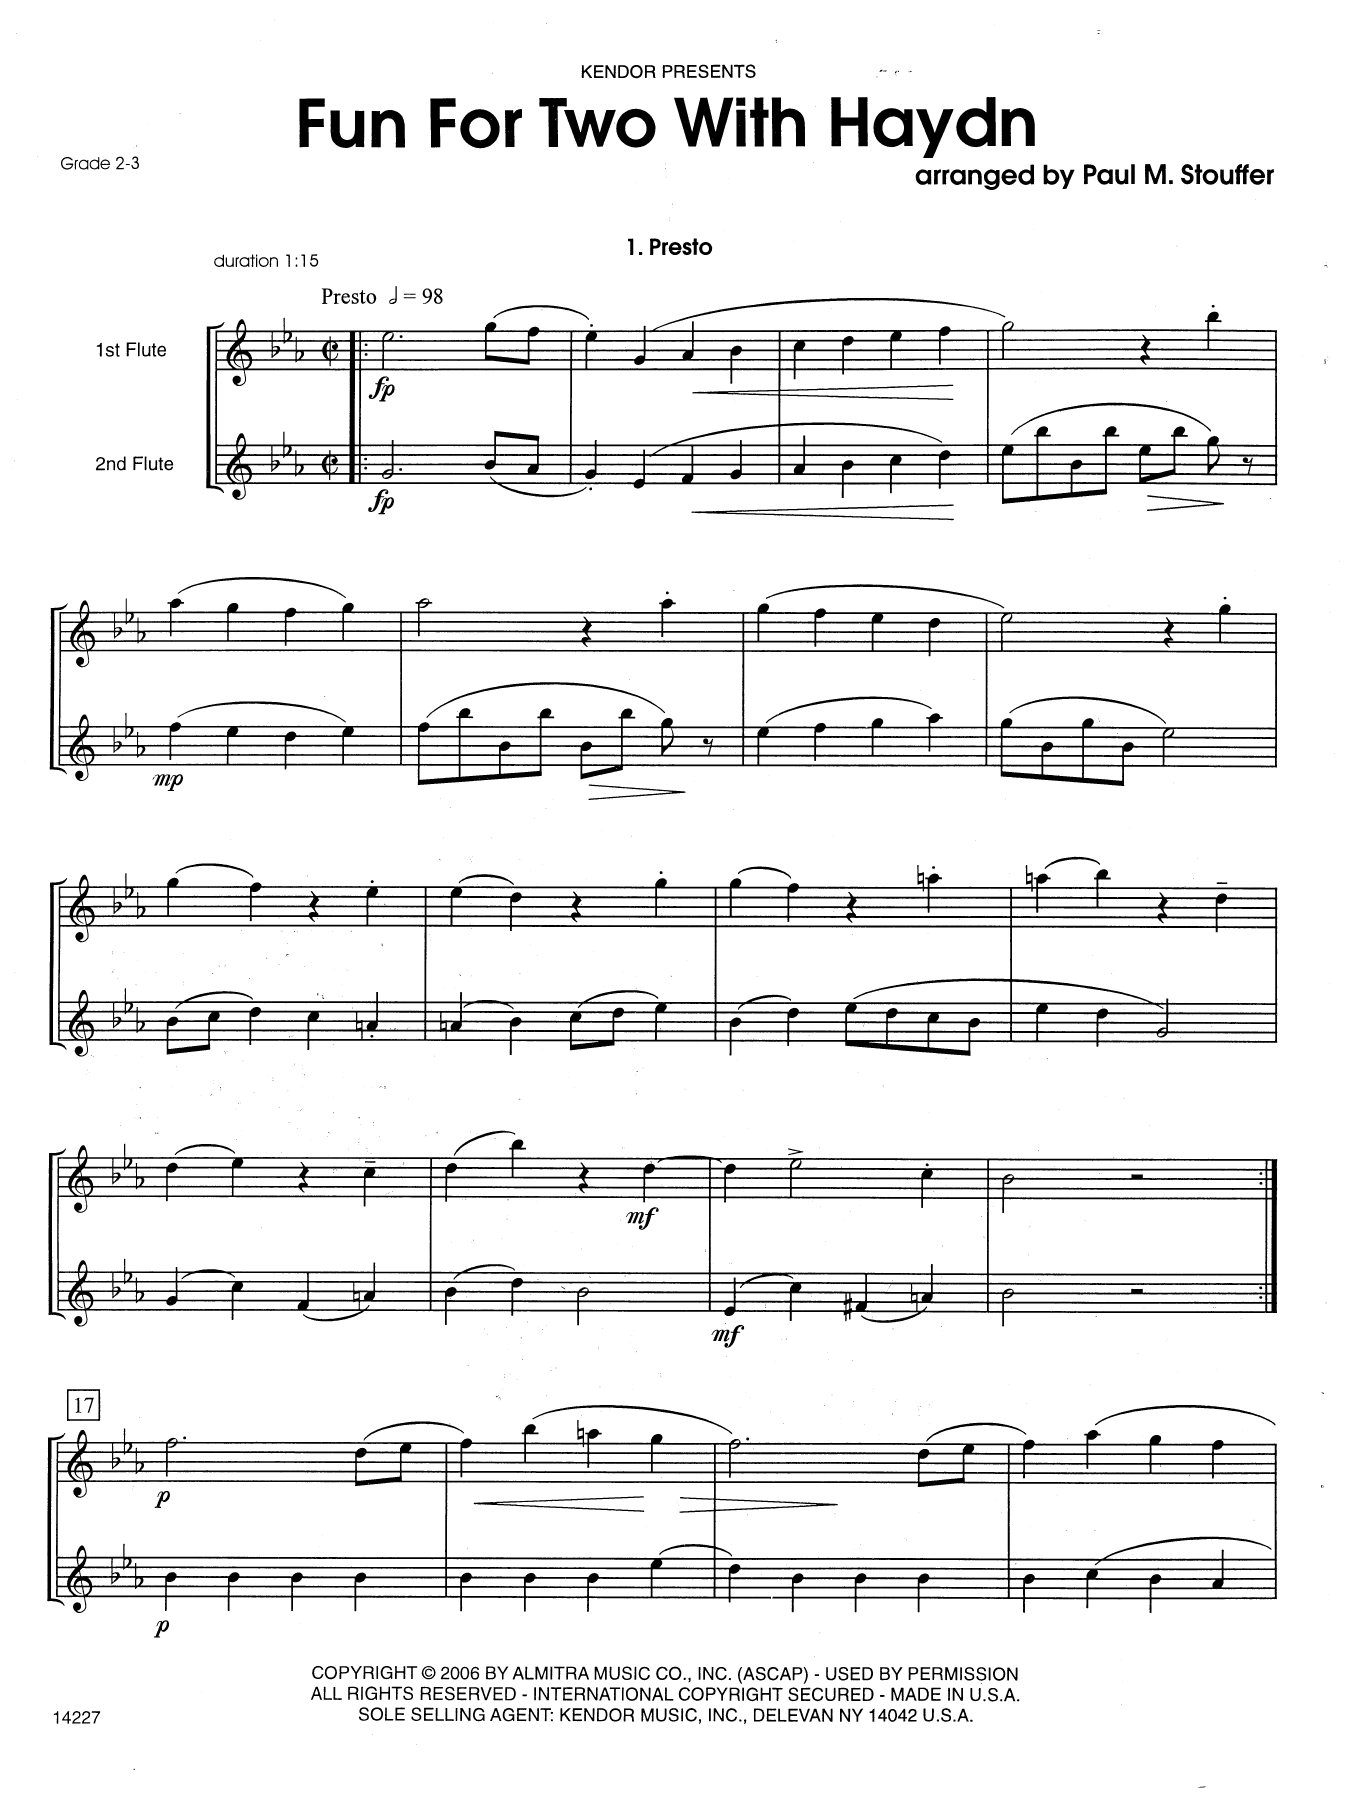 Download Paul M. Stouffer Fun For Two With Haydn Sheet Music